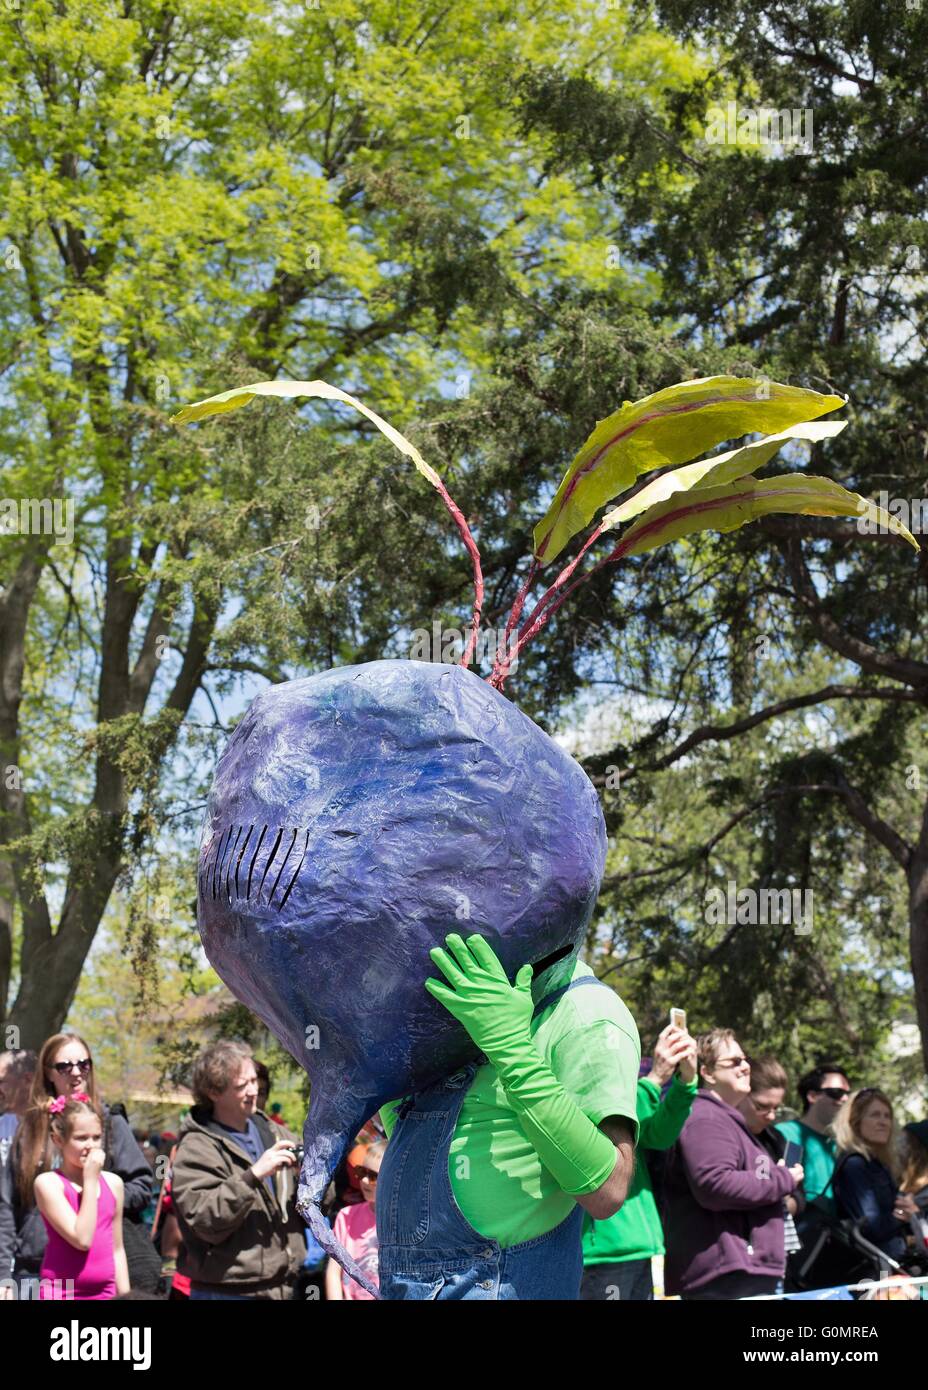 A person dressed as a giant turnip at the May Day celebration including parade and festival in Minneapolis, Minnesota, USA. Stock Photo